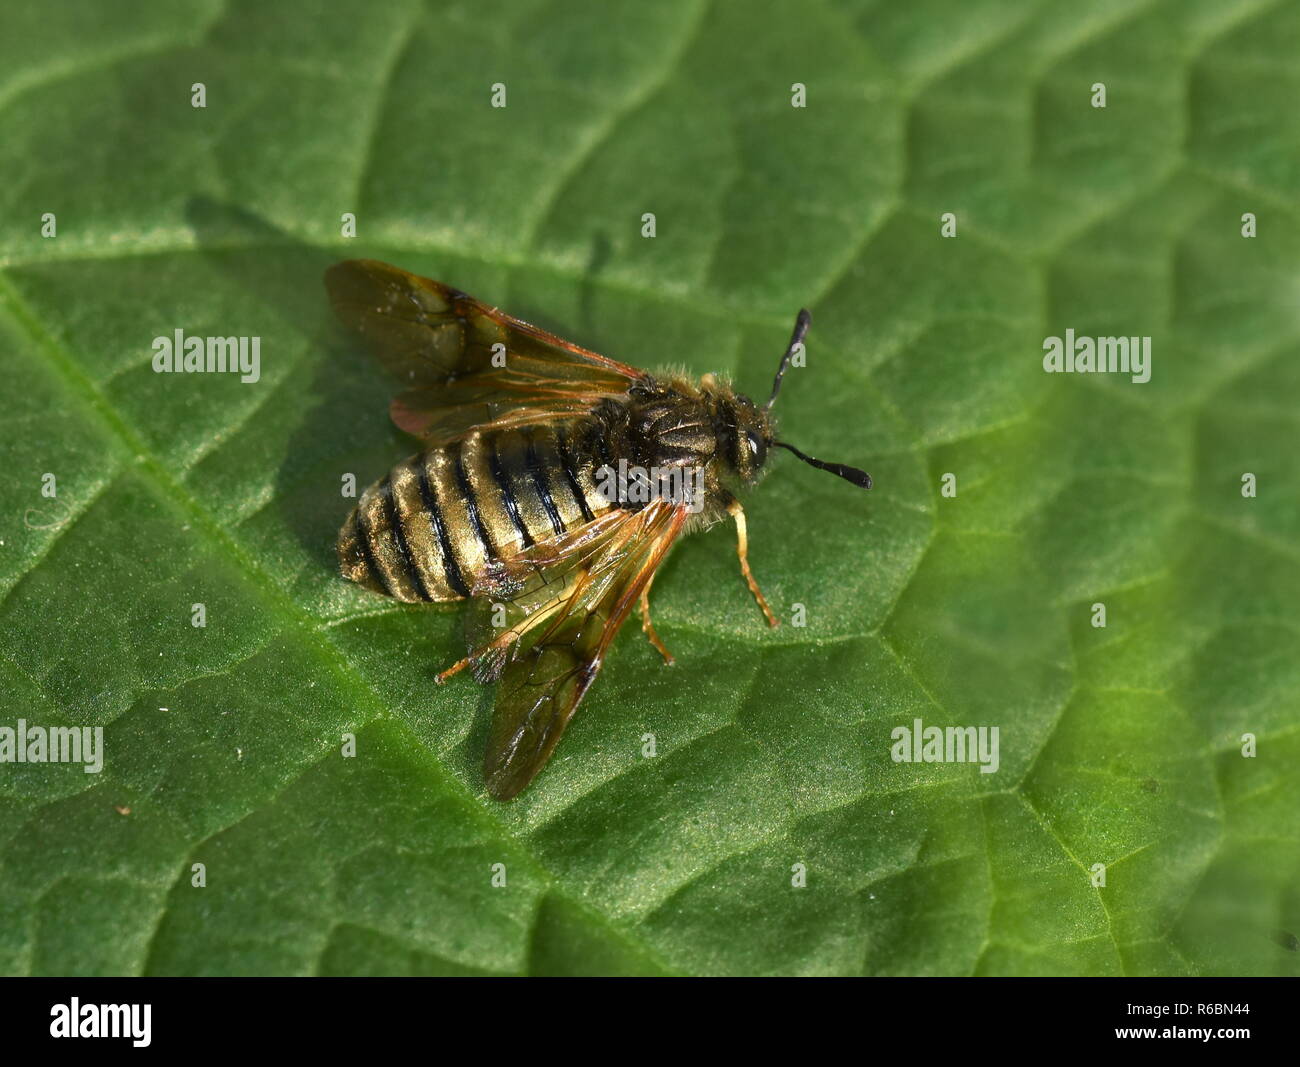 The gold and black striped sawfly Abia lonicerae sitting on a leaf Stock Photo